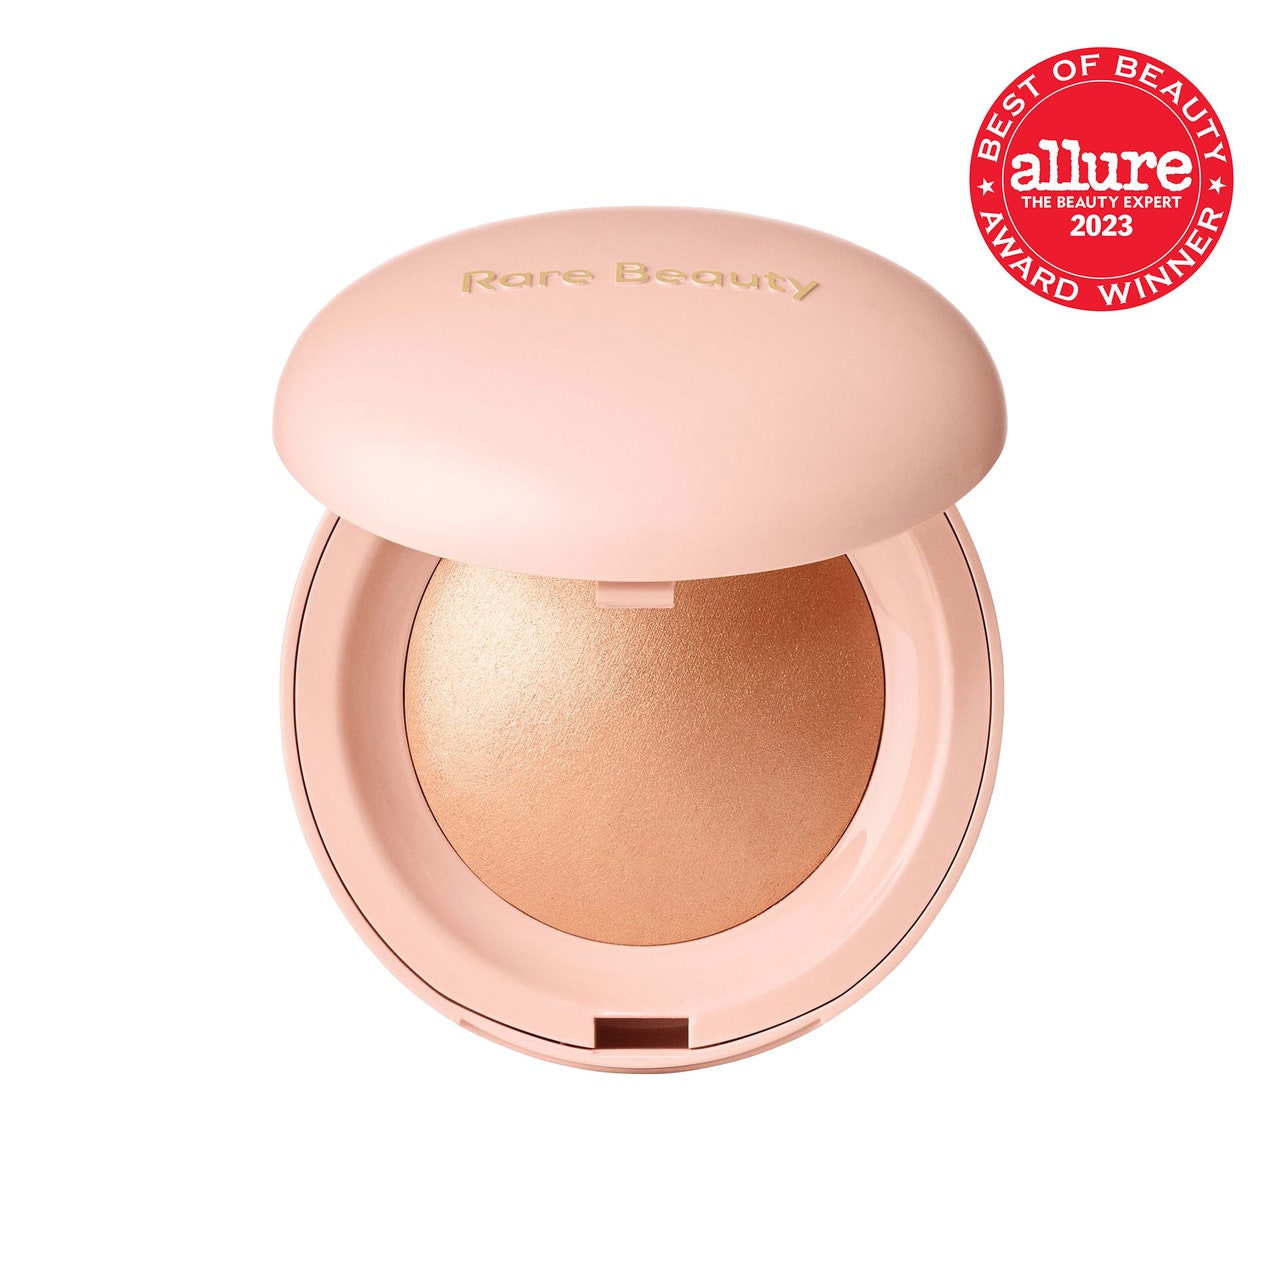 Rare Beauty Positive Light Silky Touch Highlighter pale pink compact of gold champagne powder highlighter on white background with red Allure BoB seal in the top right corner